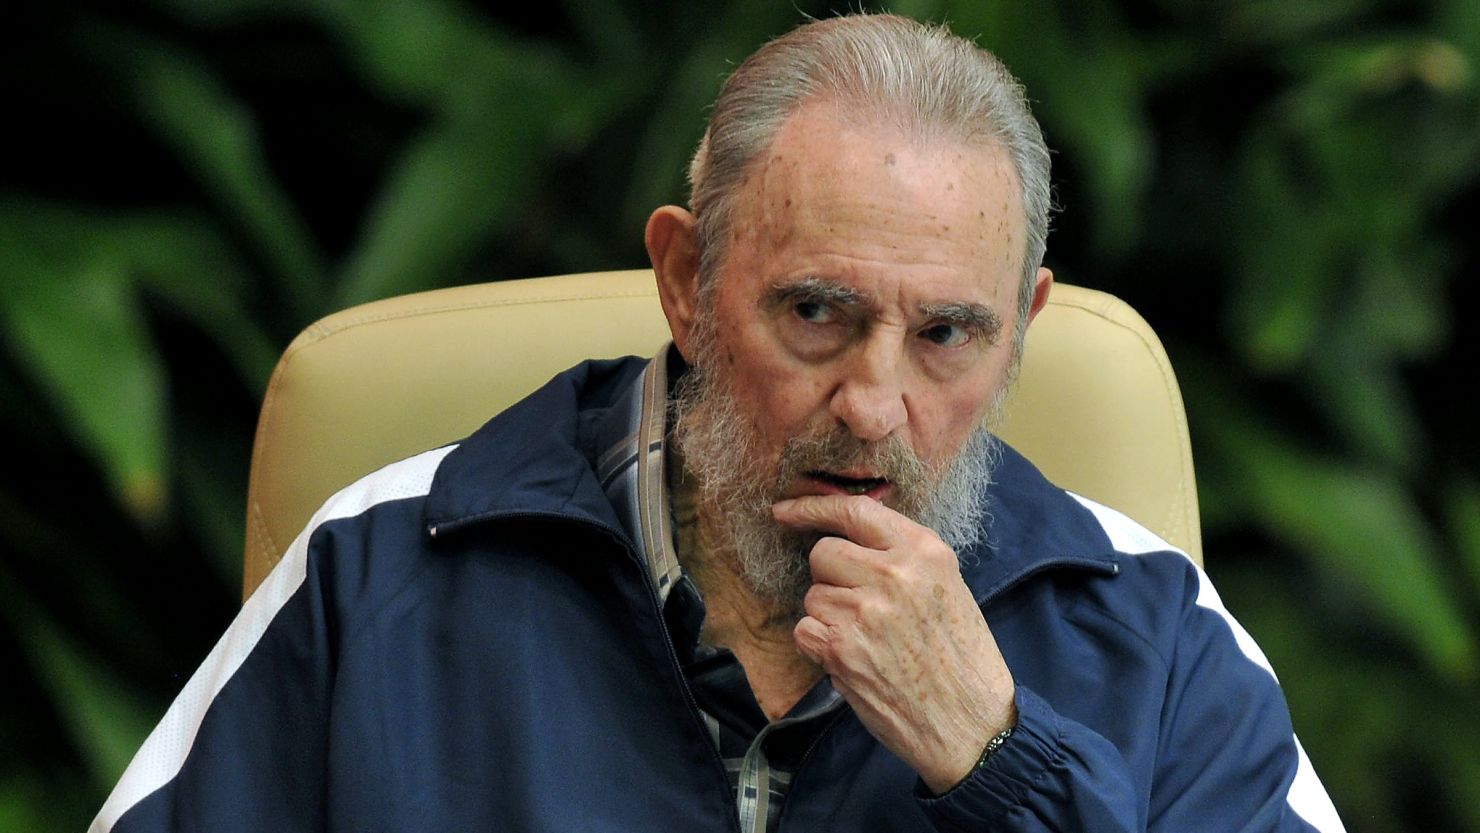 Long-time Cuban president Fidel Castro was forced to step down following a still-undisclosed intestinal illness in 2006.